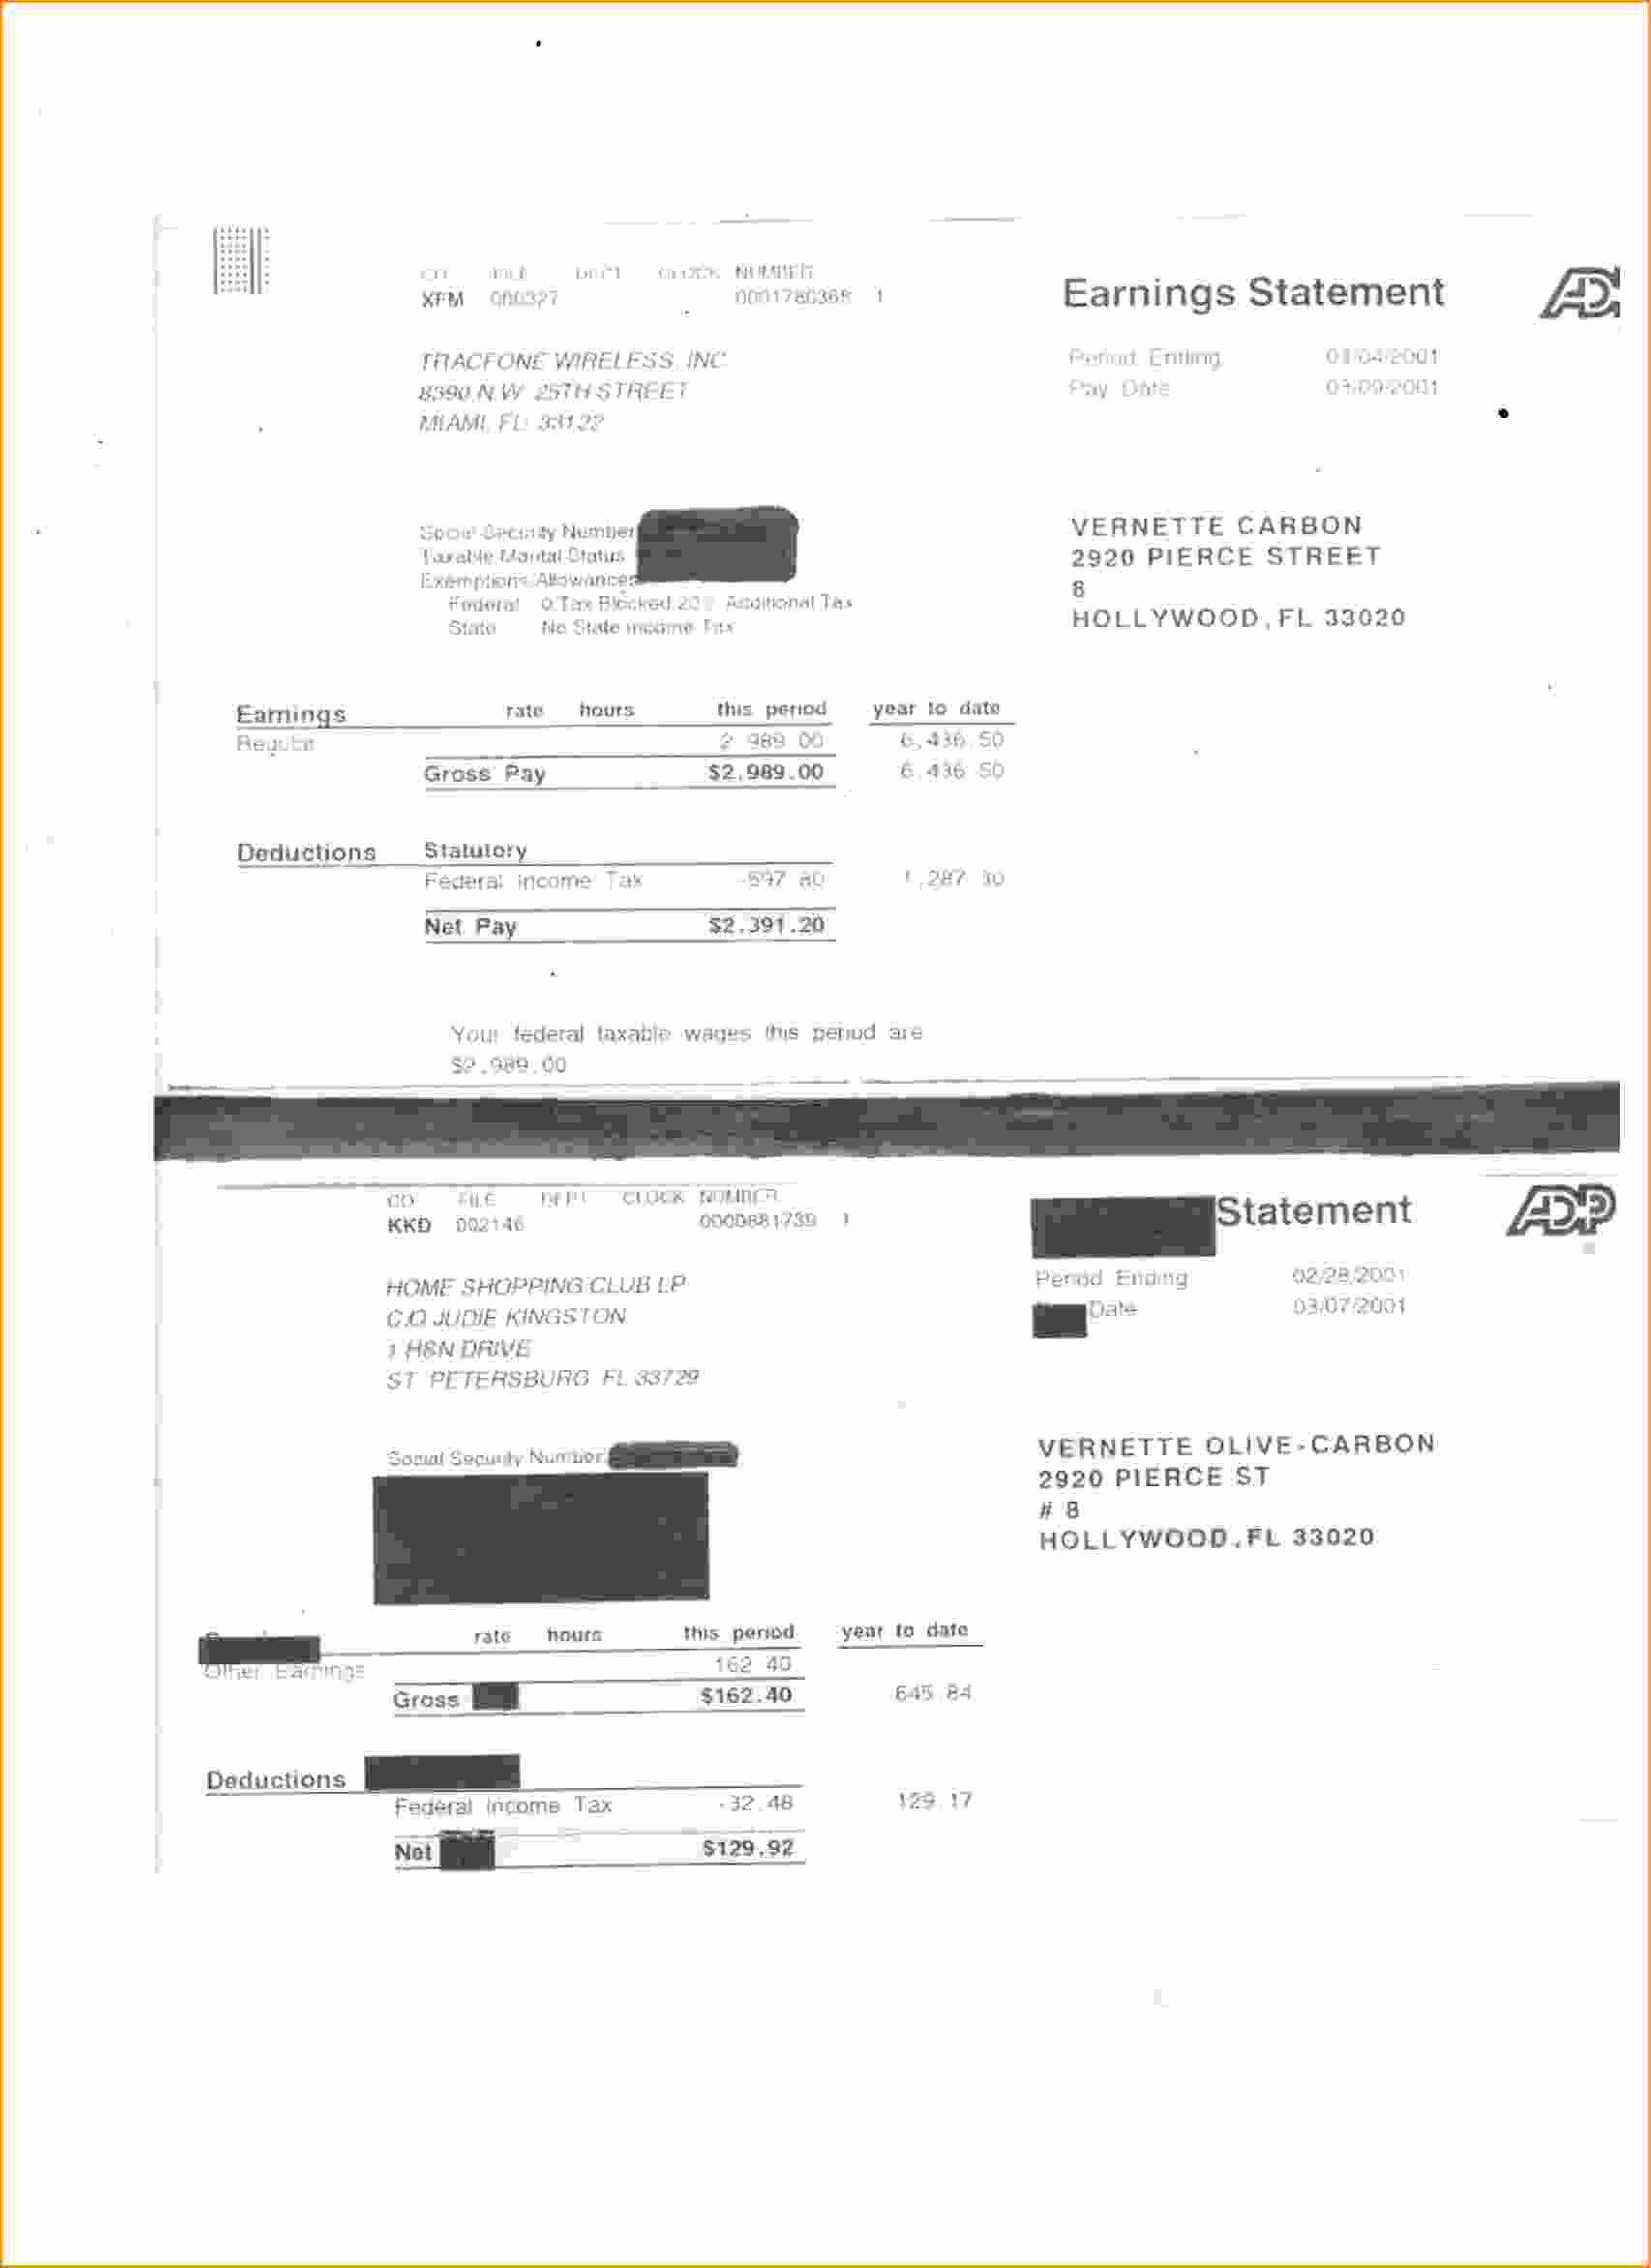 Adp Earnings Statement Template Inspirational Earning Statement Template Bamboodownunder